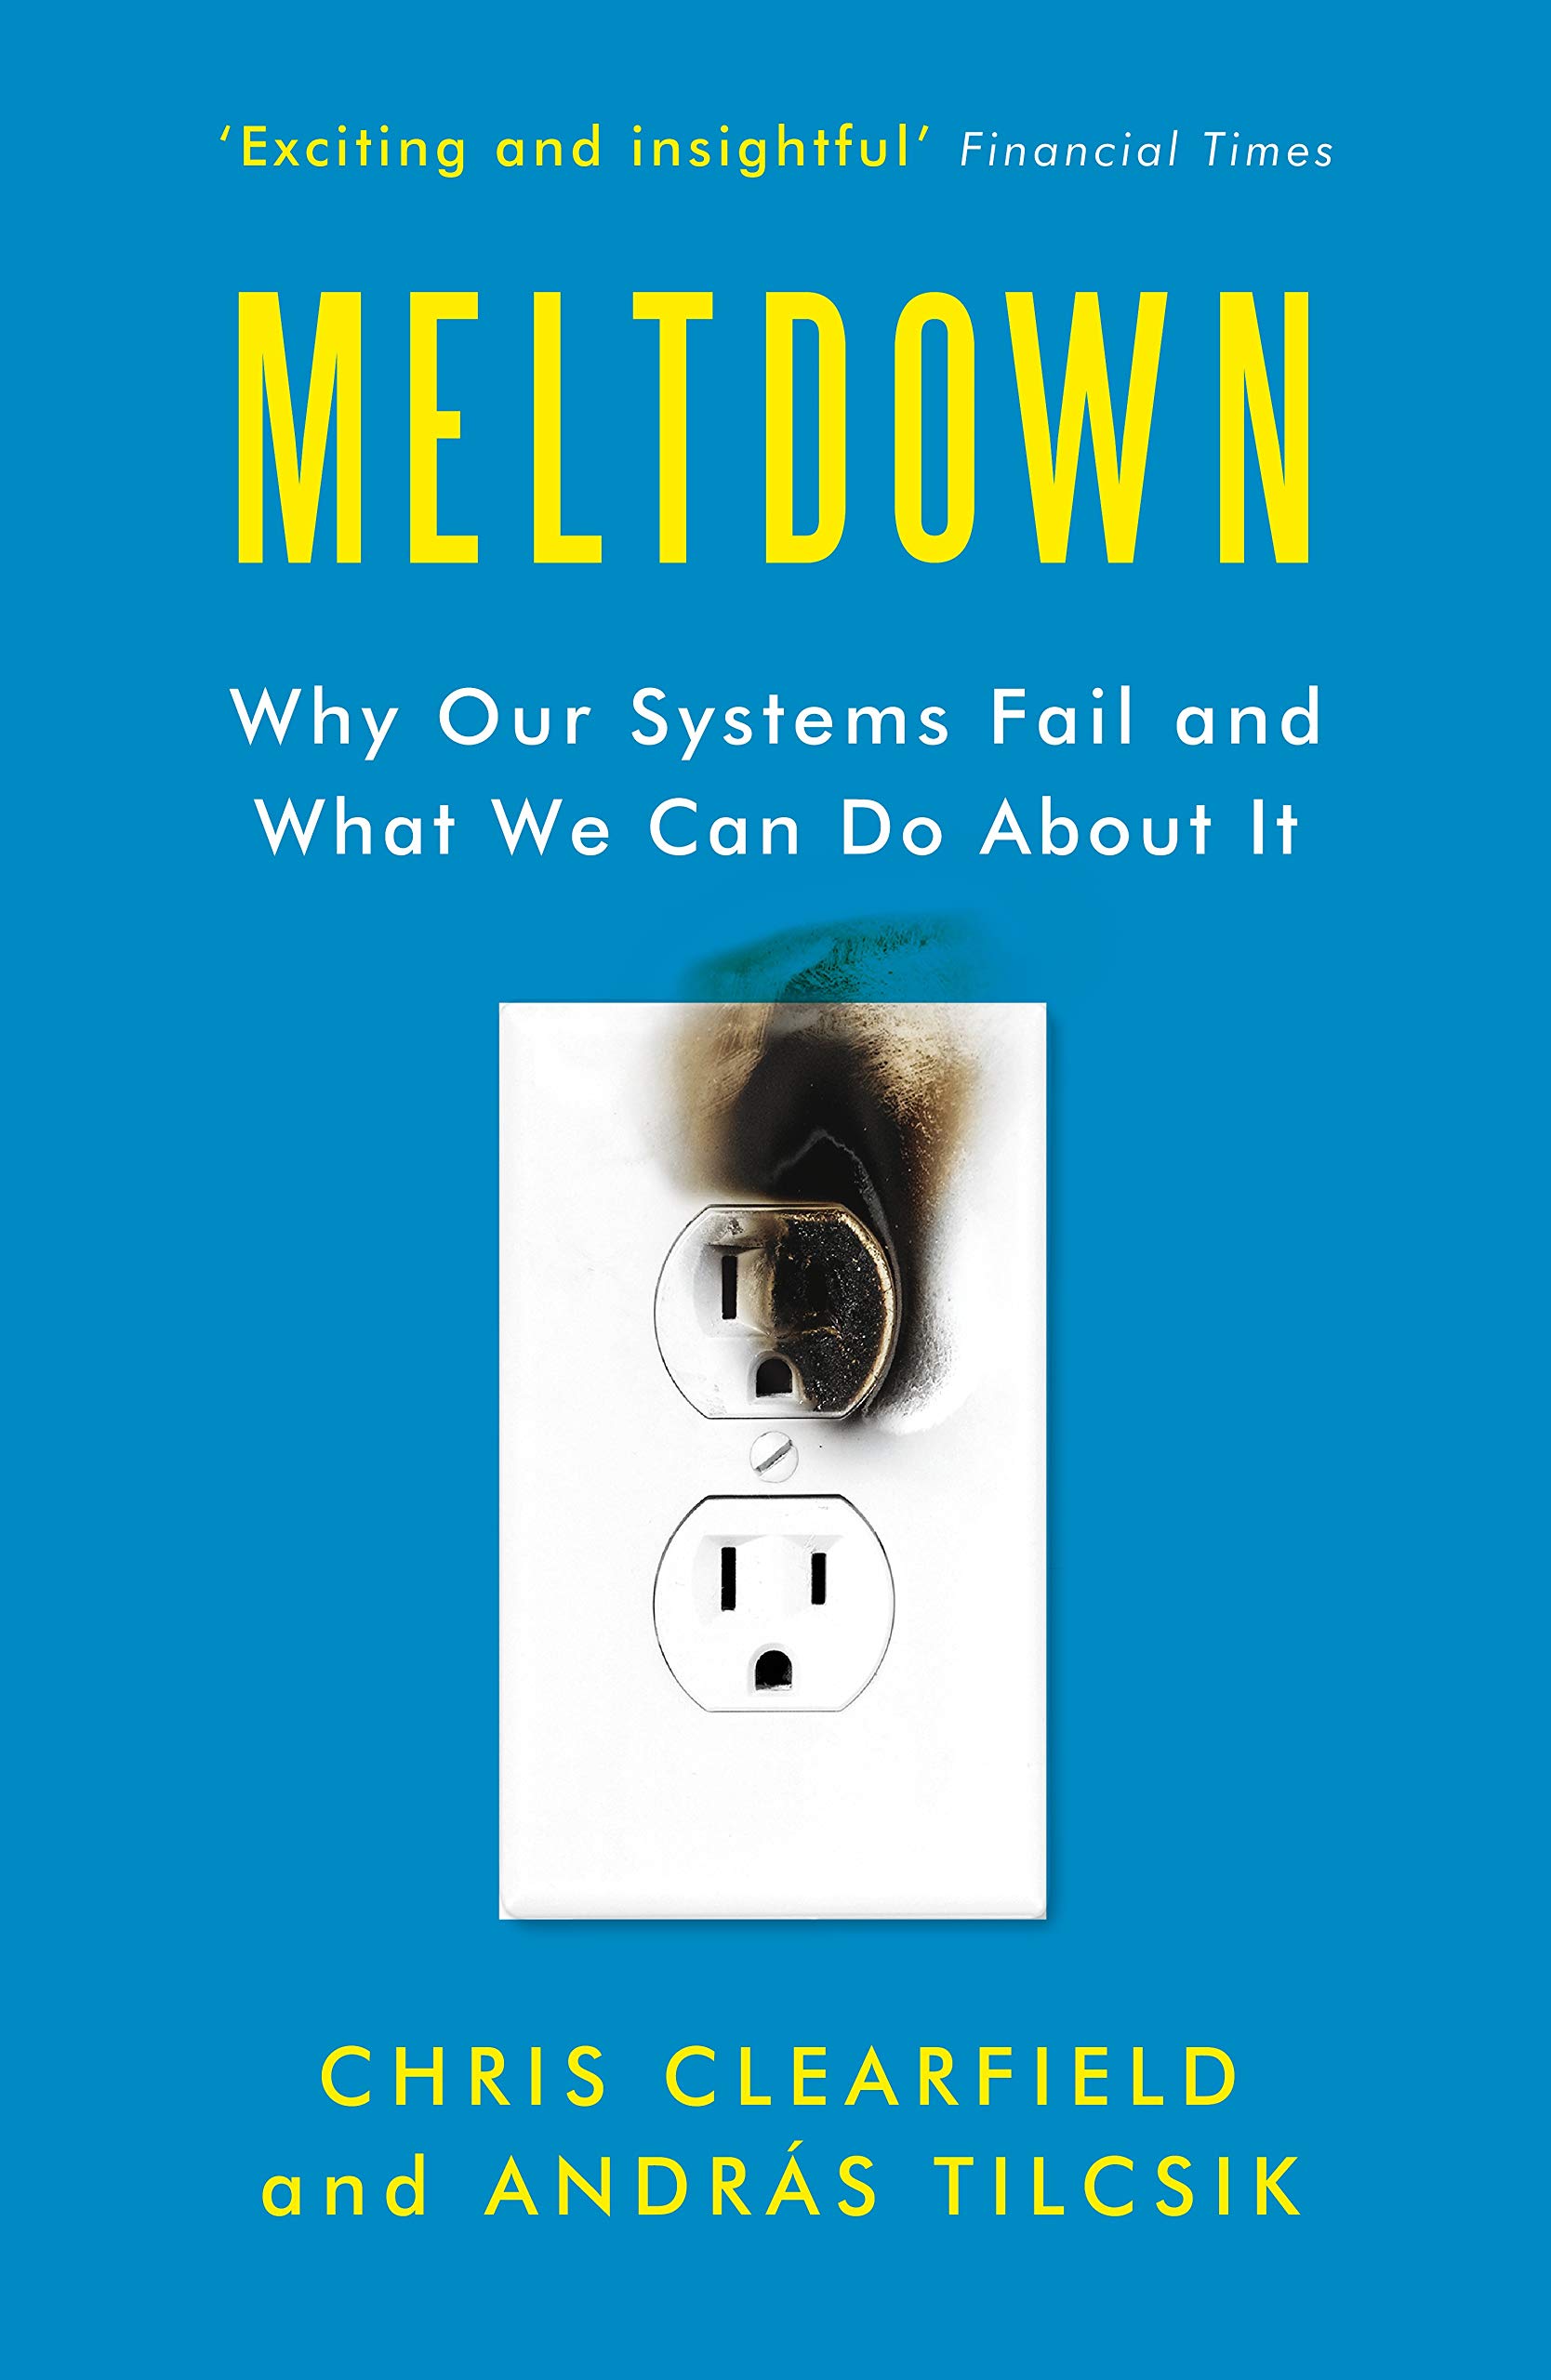 Meltdown | Chris Clearfield, Andras Tilcsik